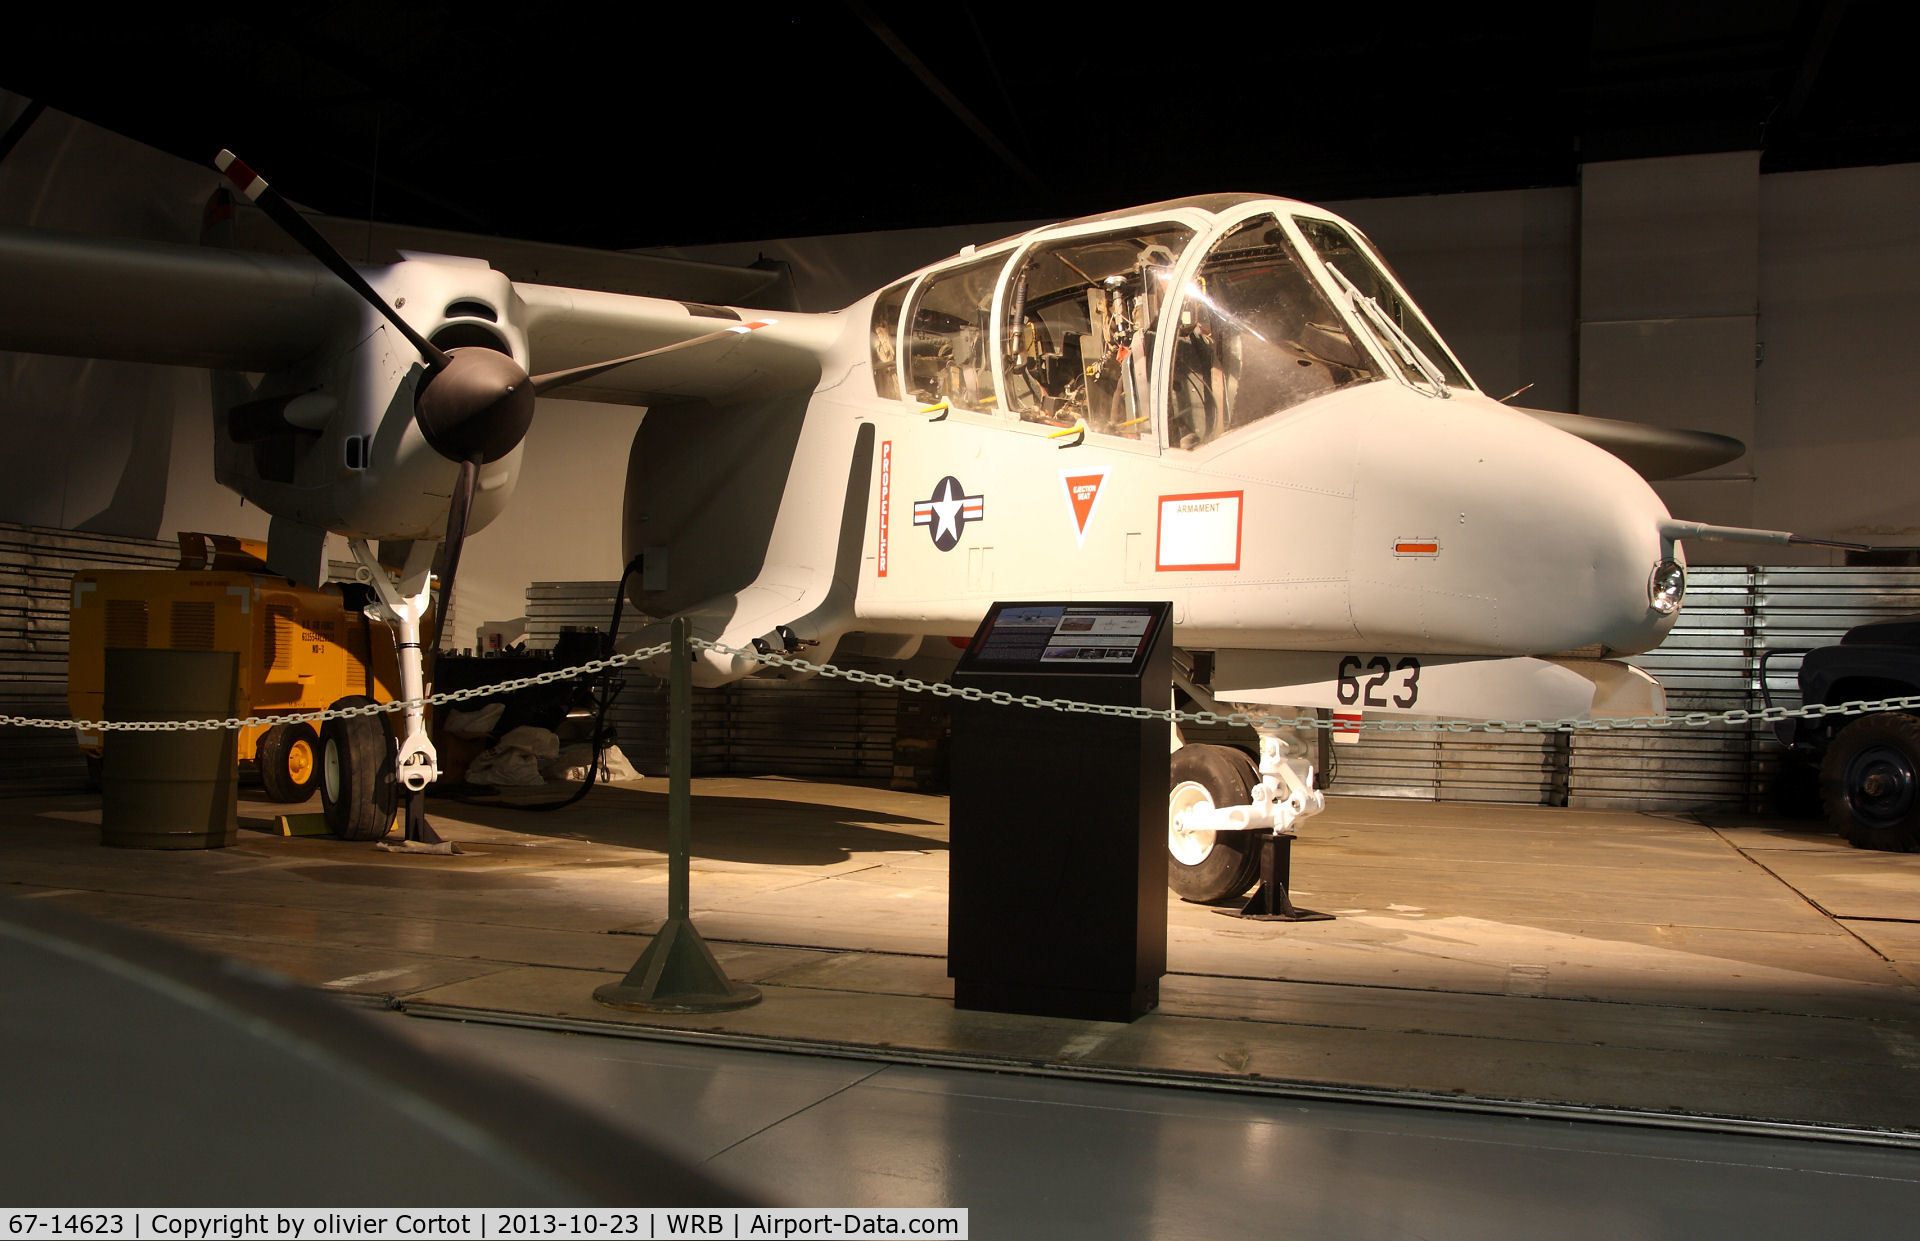 67-14623, North American Rockwell OV-10A Bronco C/N 305-31, in the dark part of the museum. Museum of Aviation, Robins AFB